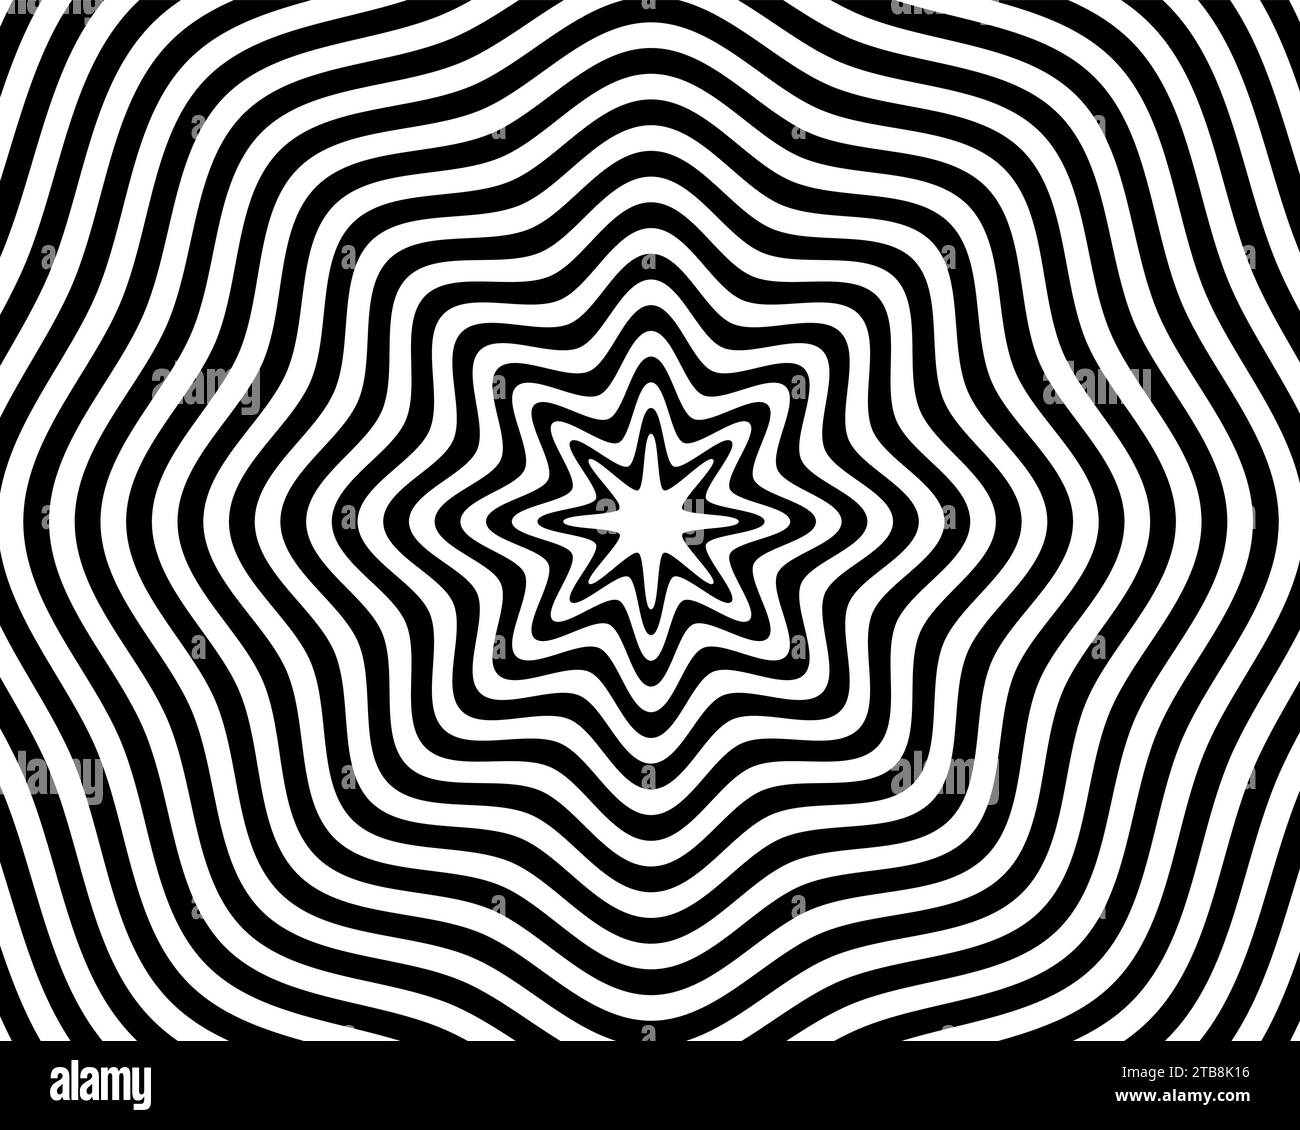 black and white spiral optical illusion background Stock Vector